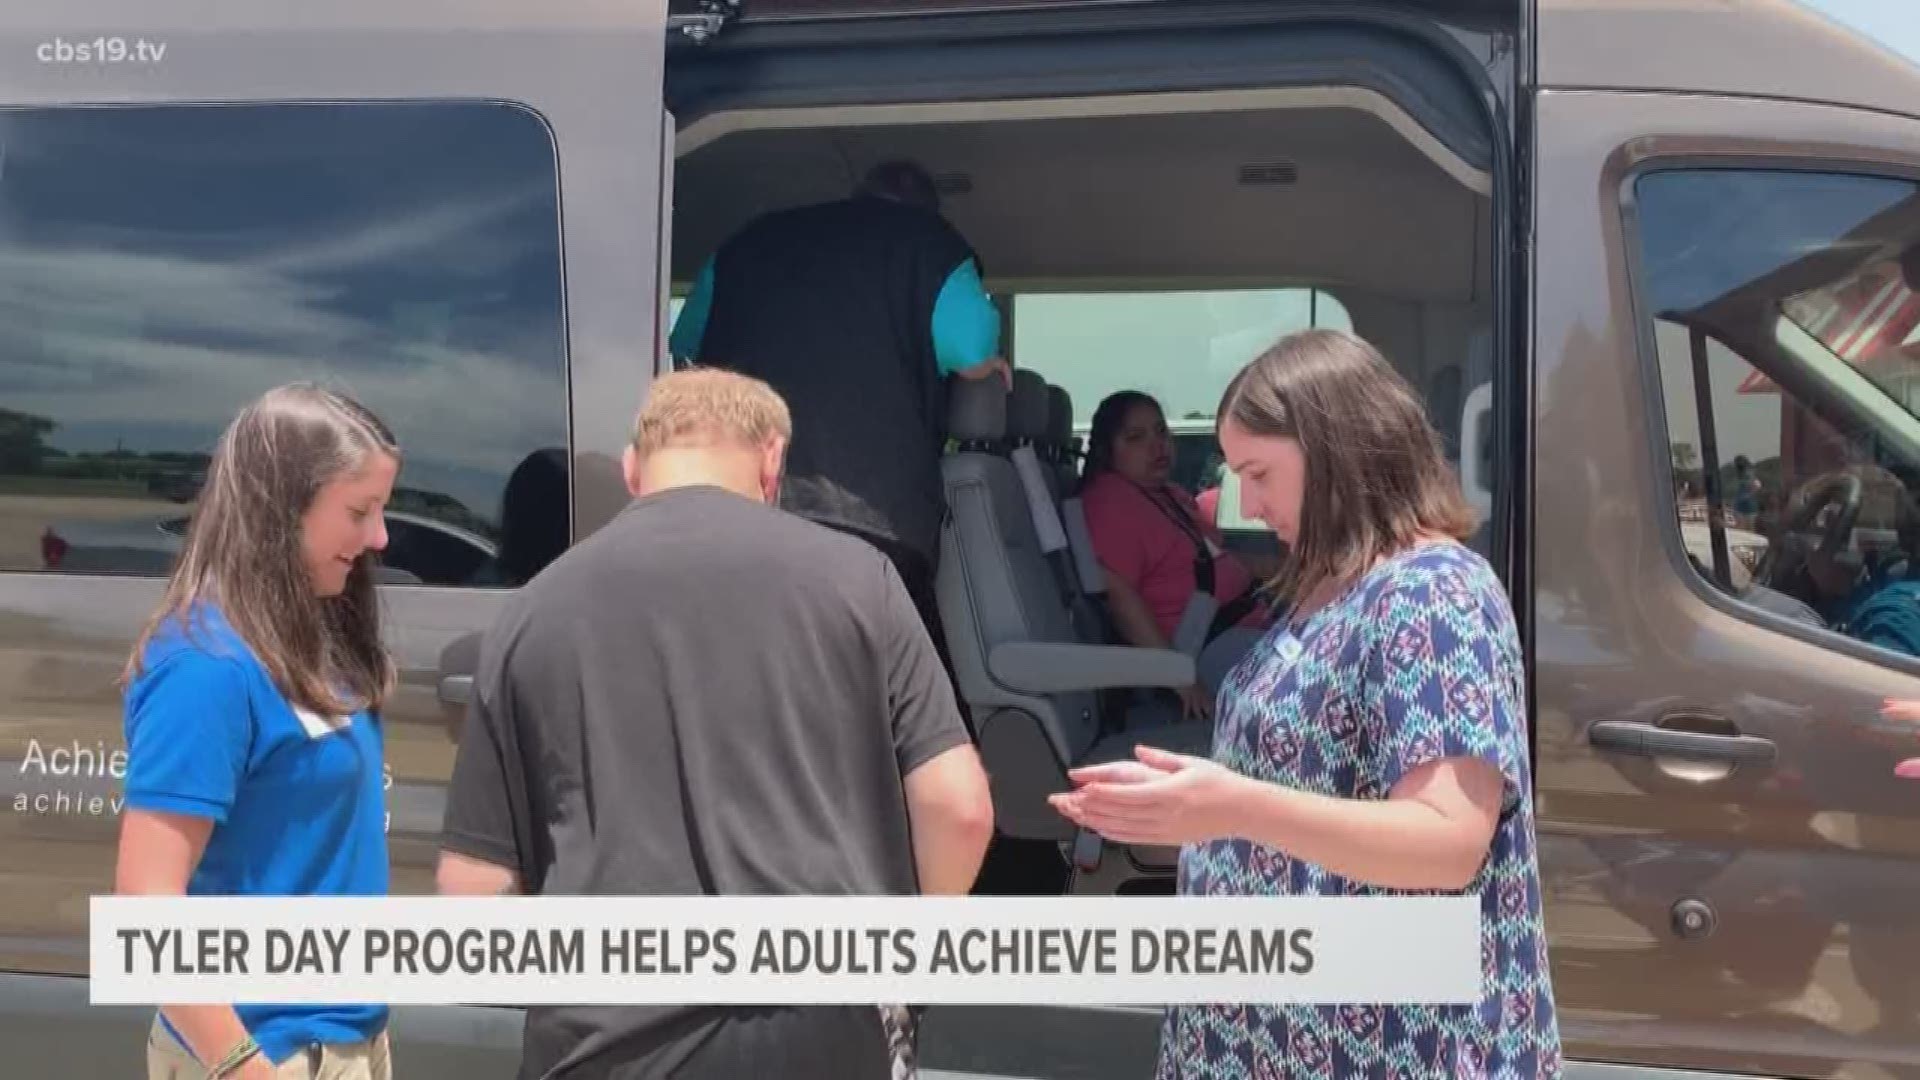 Achieving Dreams is a nonprofit that works with adults who have special needs to provide the opportunity of "giving back" to the community.